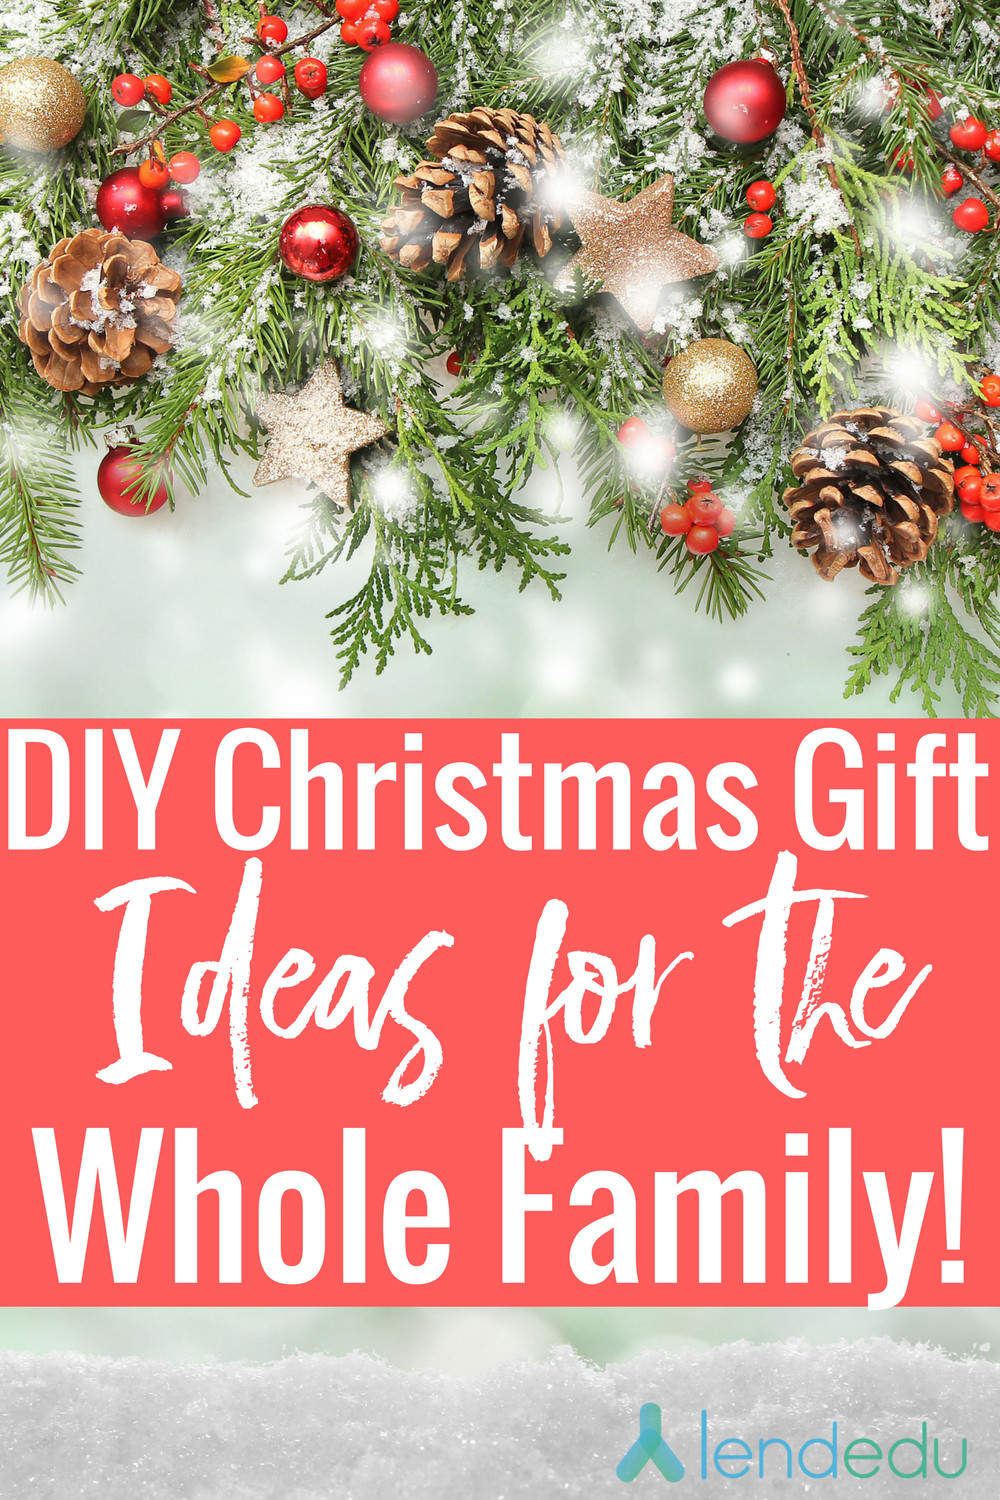 Christmas Gift Ideas For The Whole Family
 DIY Christmas Gifts for the Whole Family LendEDU